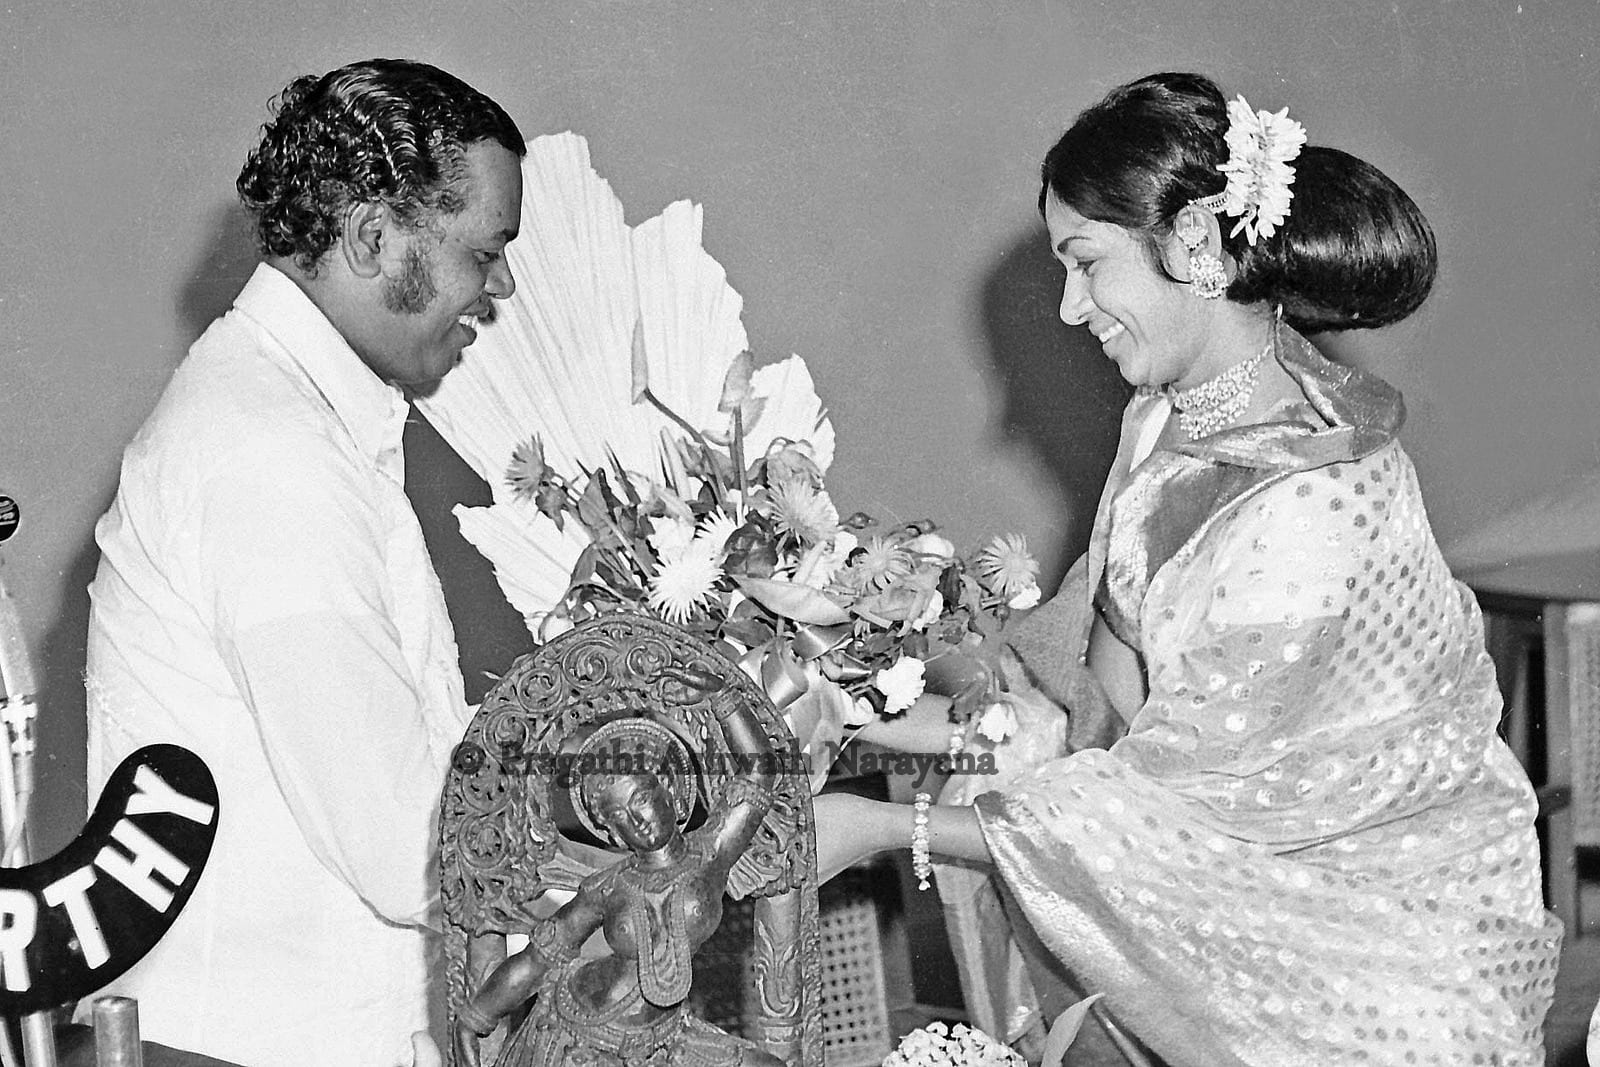 When actress Kalpana served food to Puttanna Kanagal and he gave her a laddoo